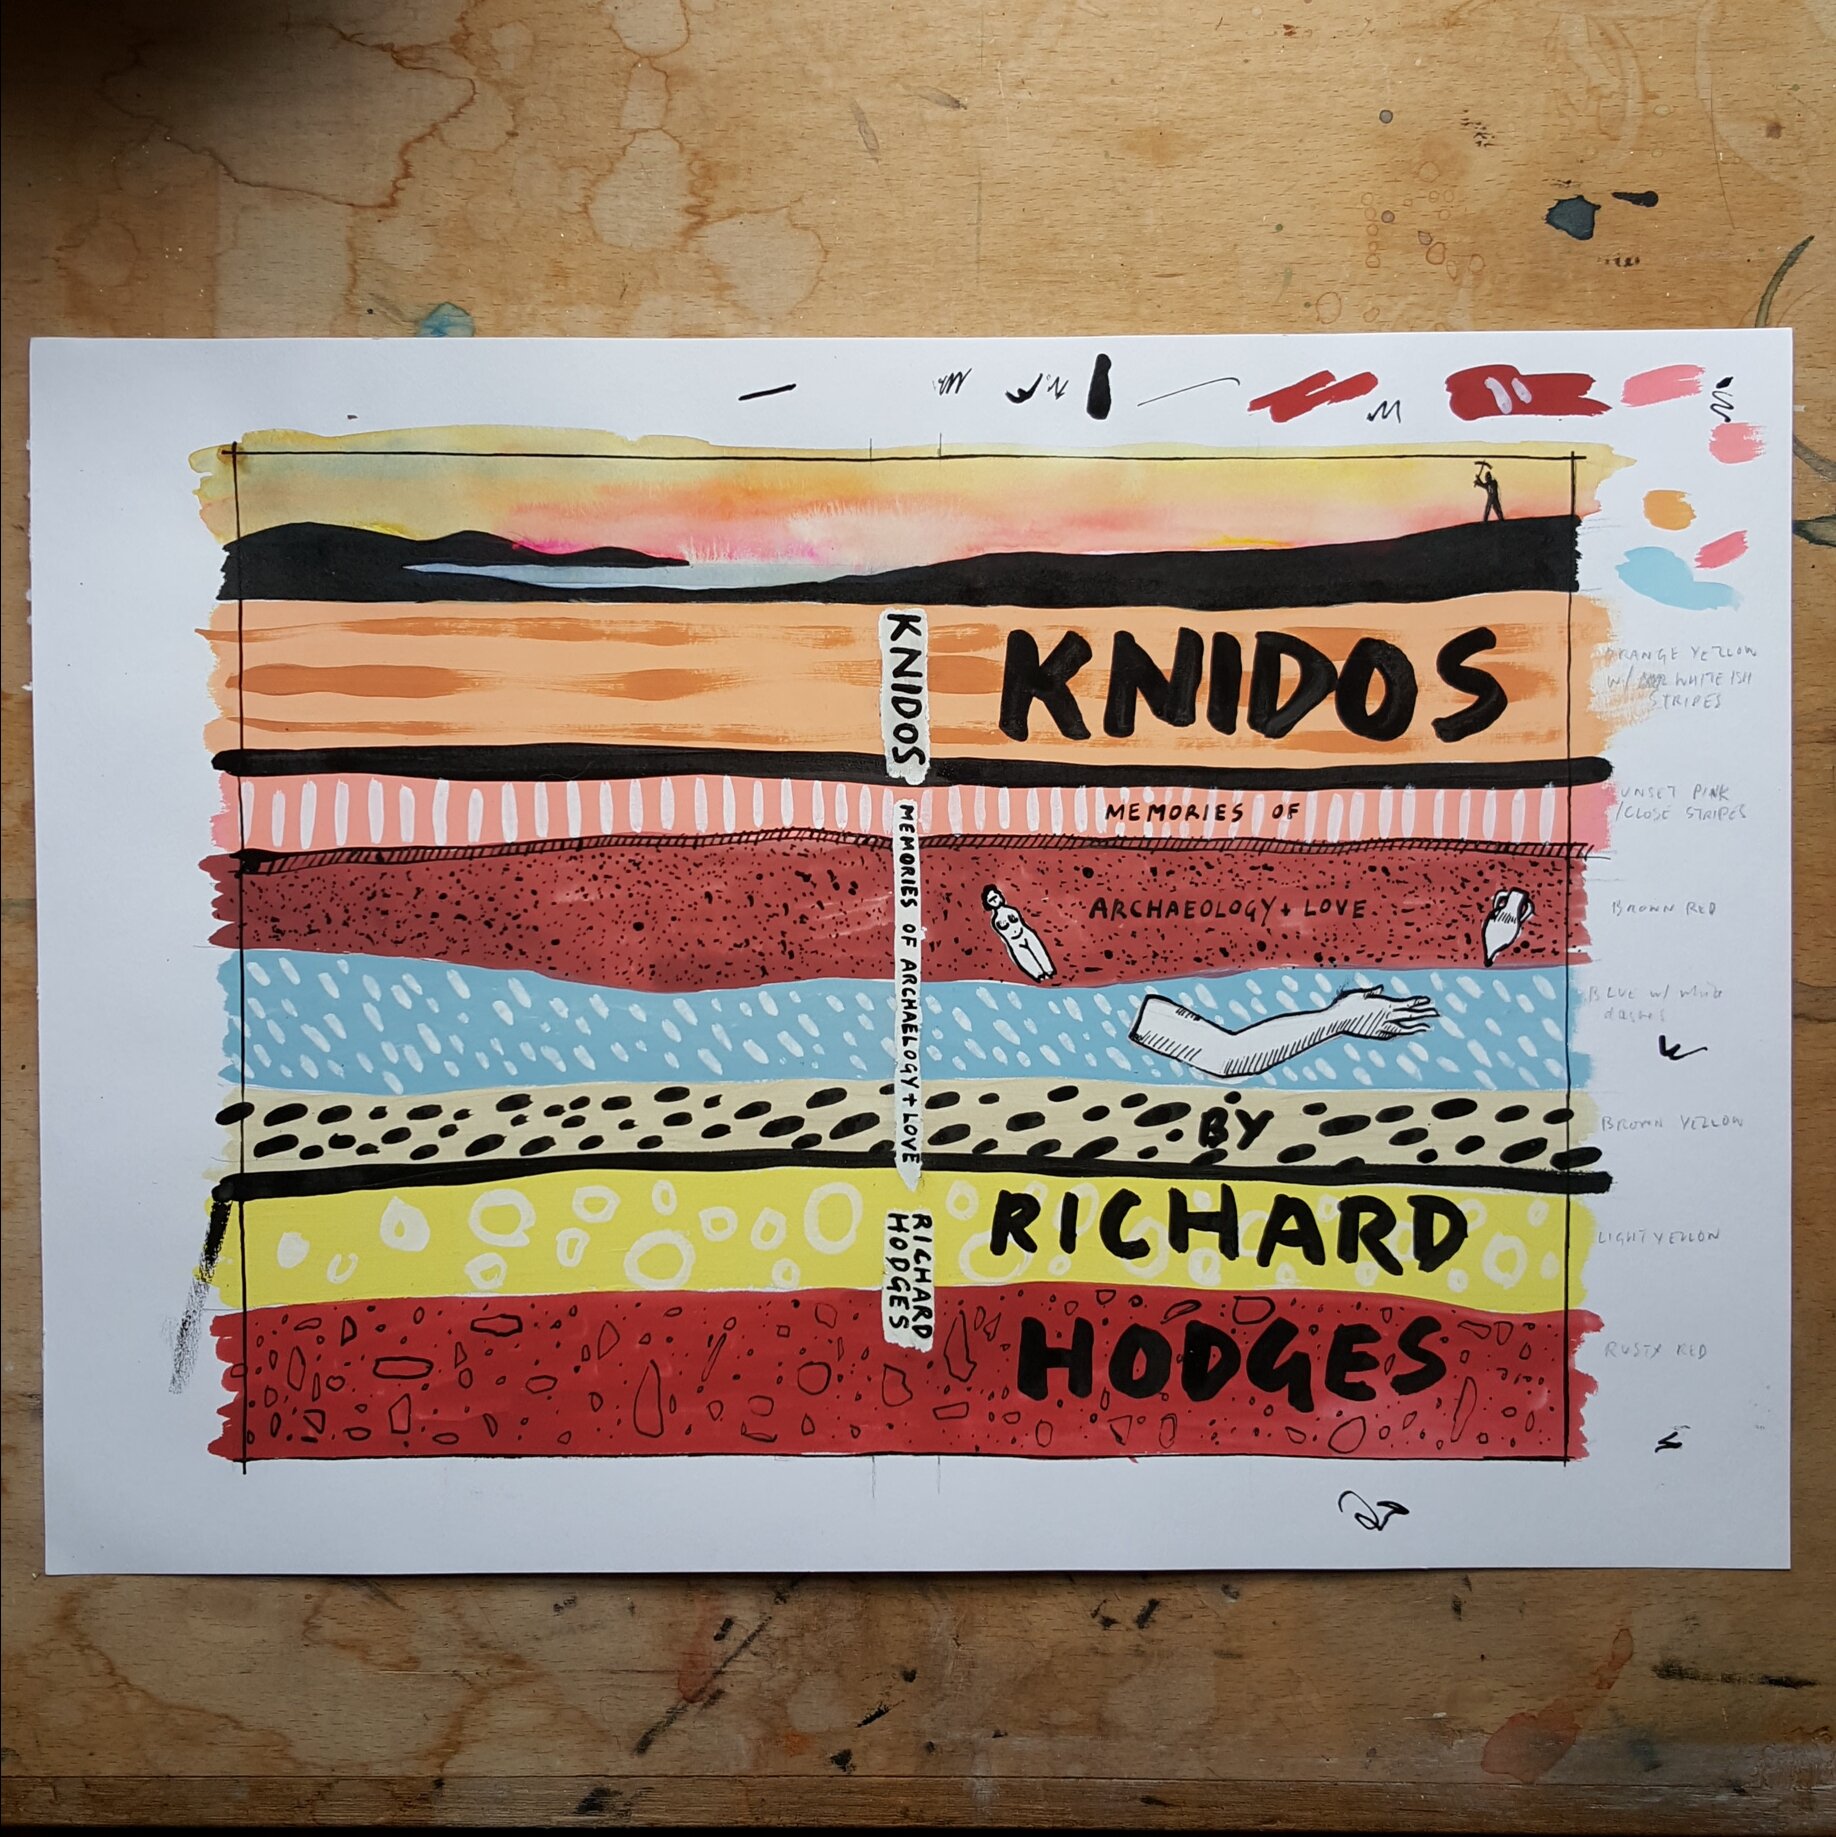 Book cover design for "Knidos" by Richard Hodges (drawing)